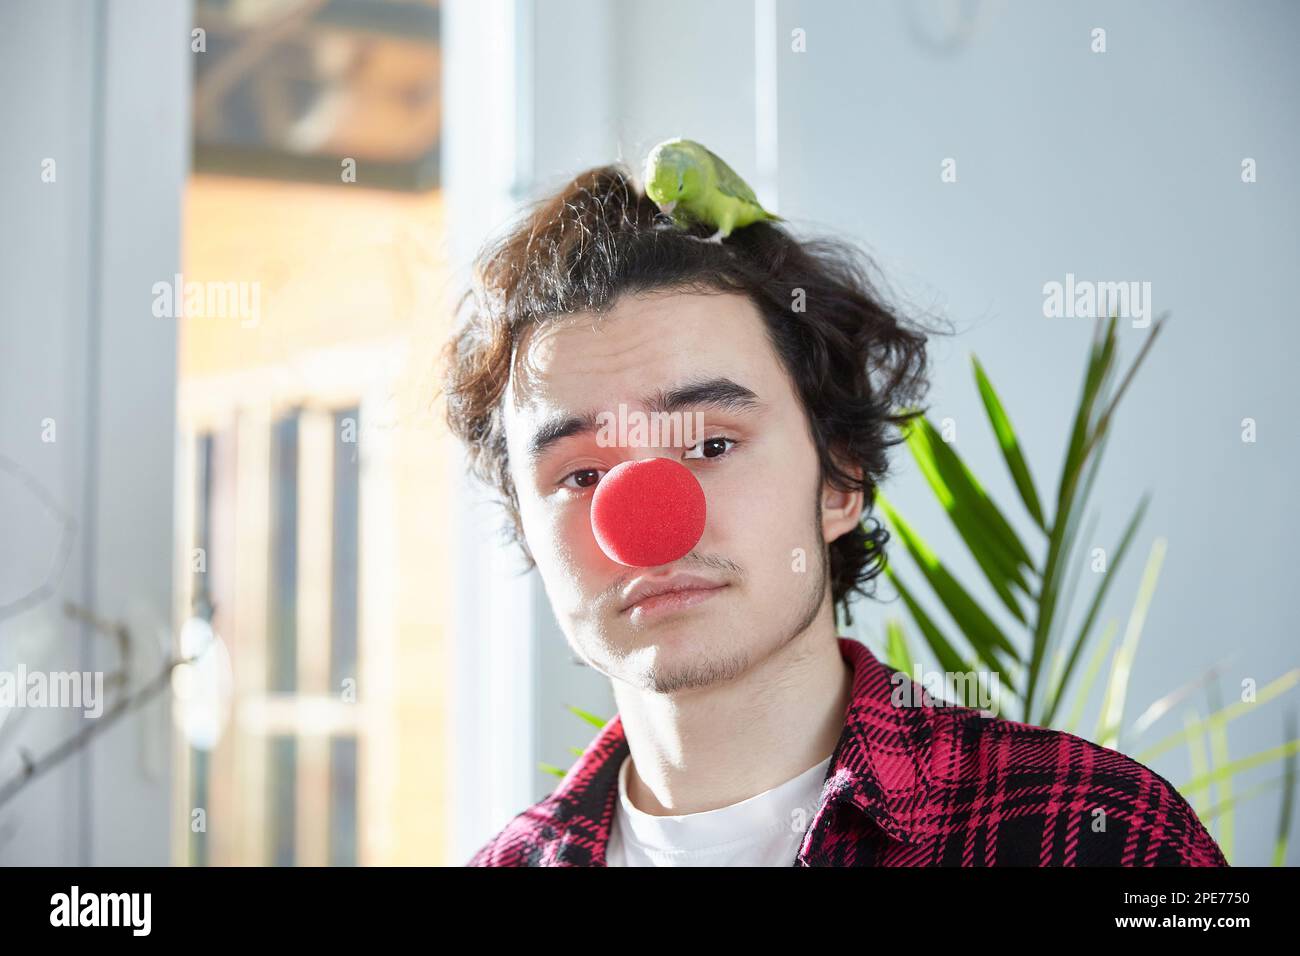 The unlucky birthday of a young man is saddened and disappointed that no one came to celebrate his anniversary. Pet parrot on the head. Red clown nose Stock Photo